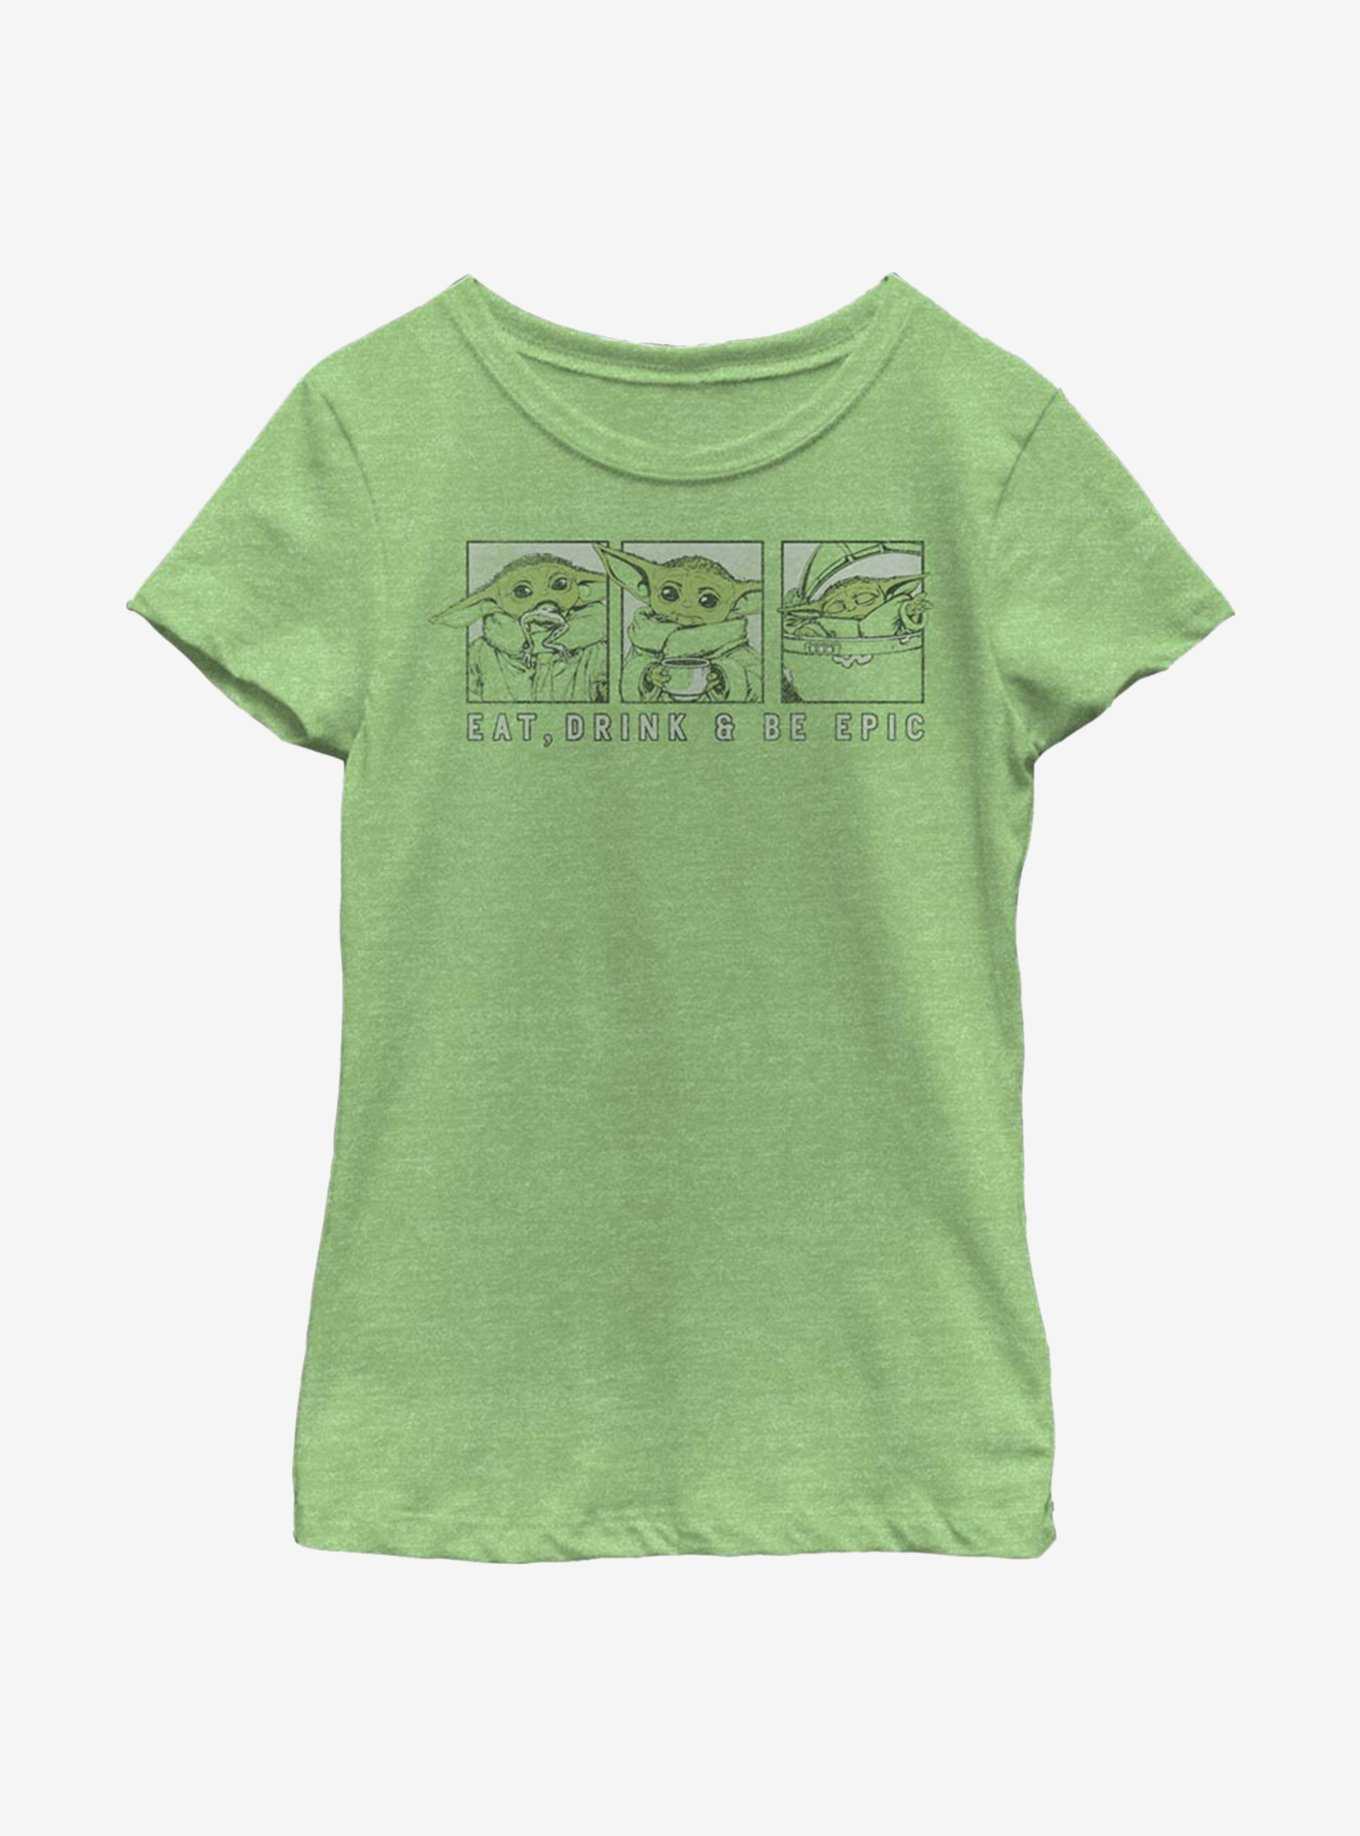 Star Wars The Mandalorian The Child Eat, Drink & Be Epic Youth Girls T-Shirt, , hi-res